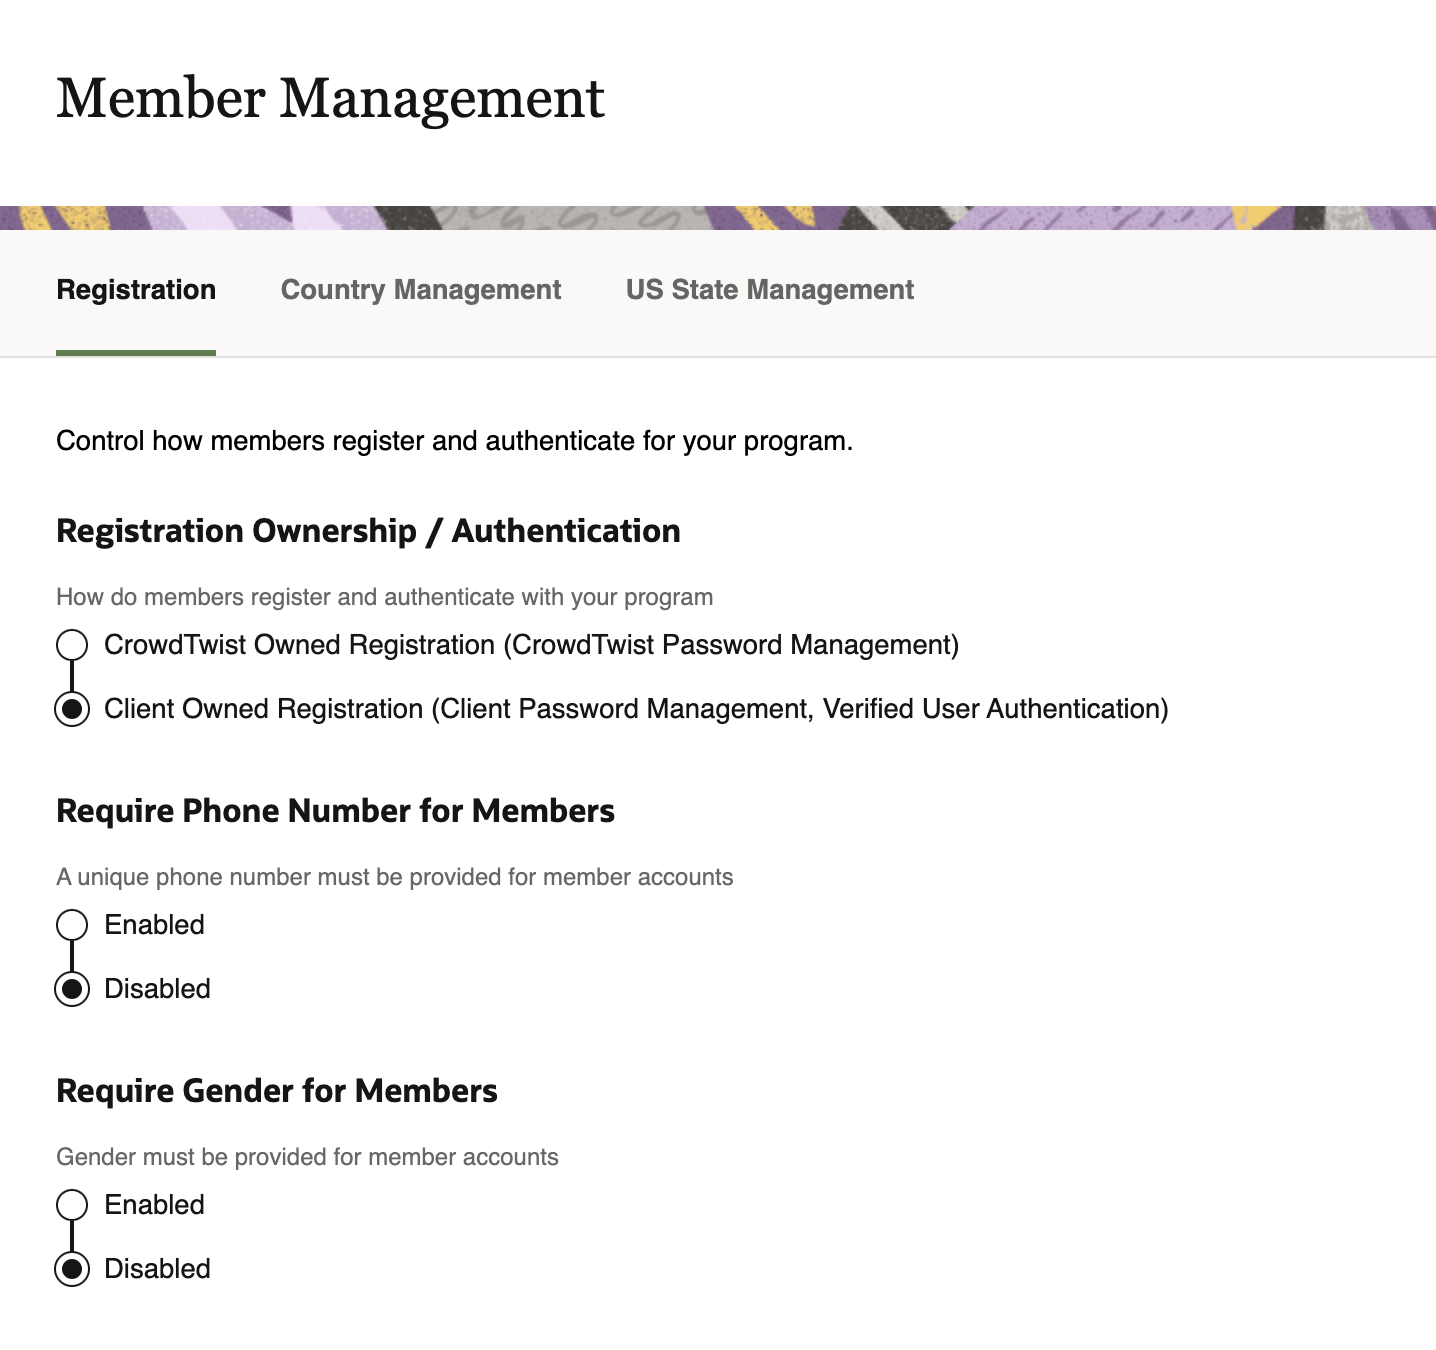 This image displays the Registration area of Member Management, with several options selected.